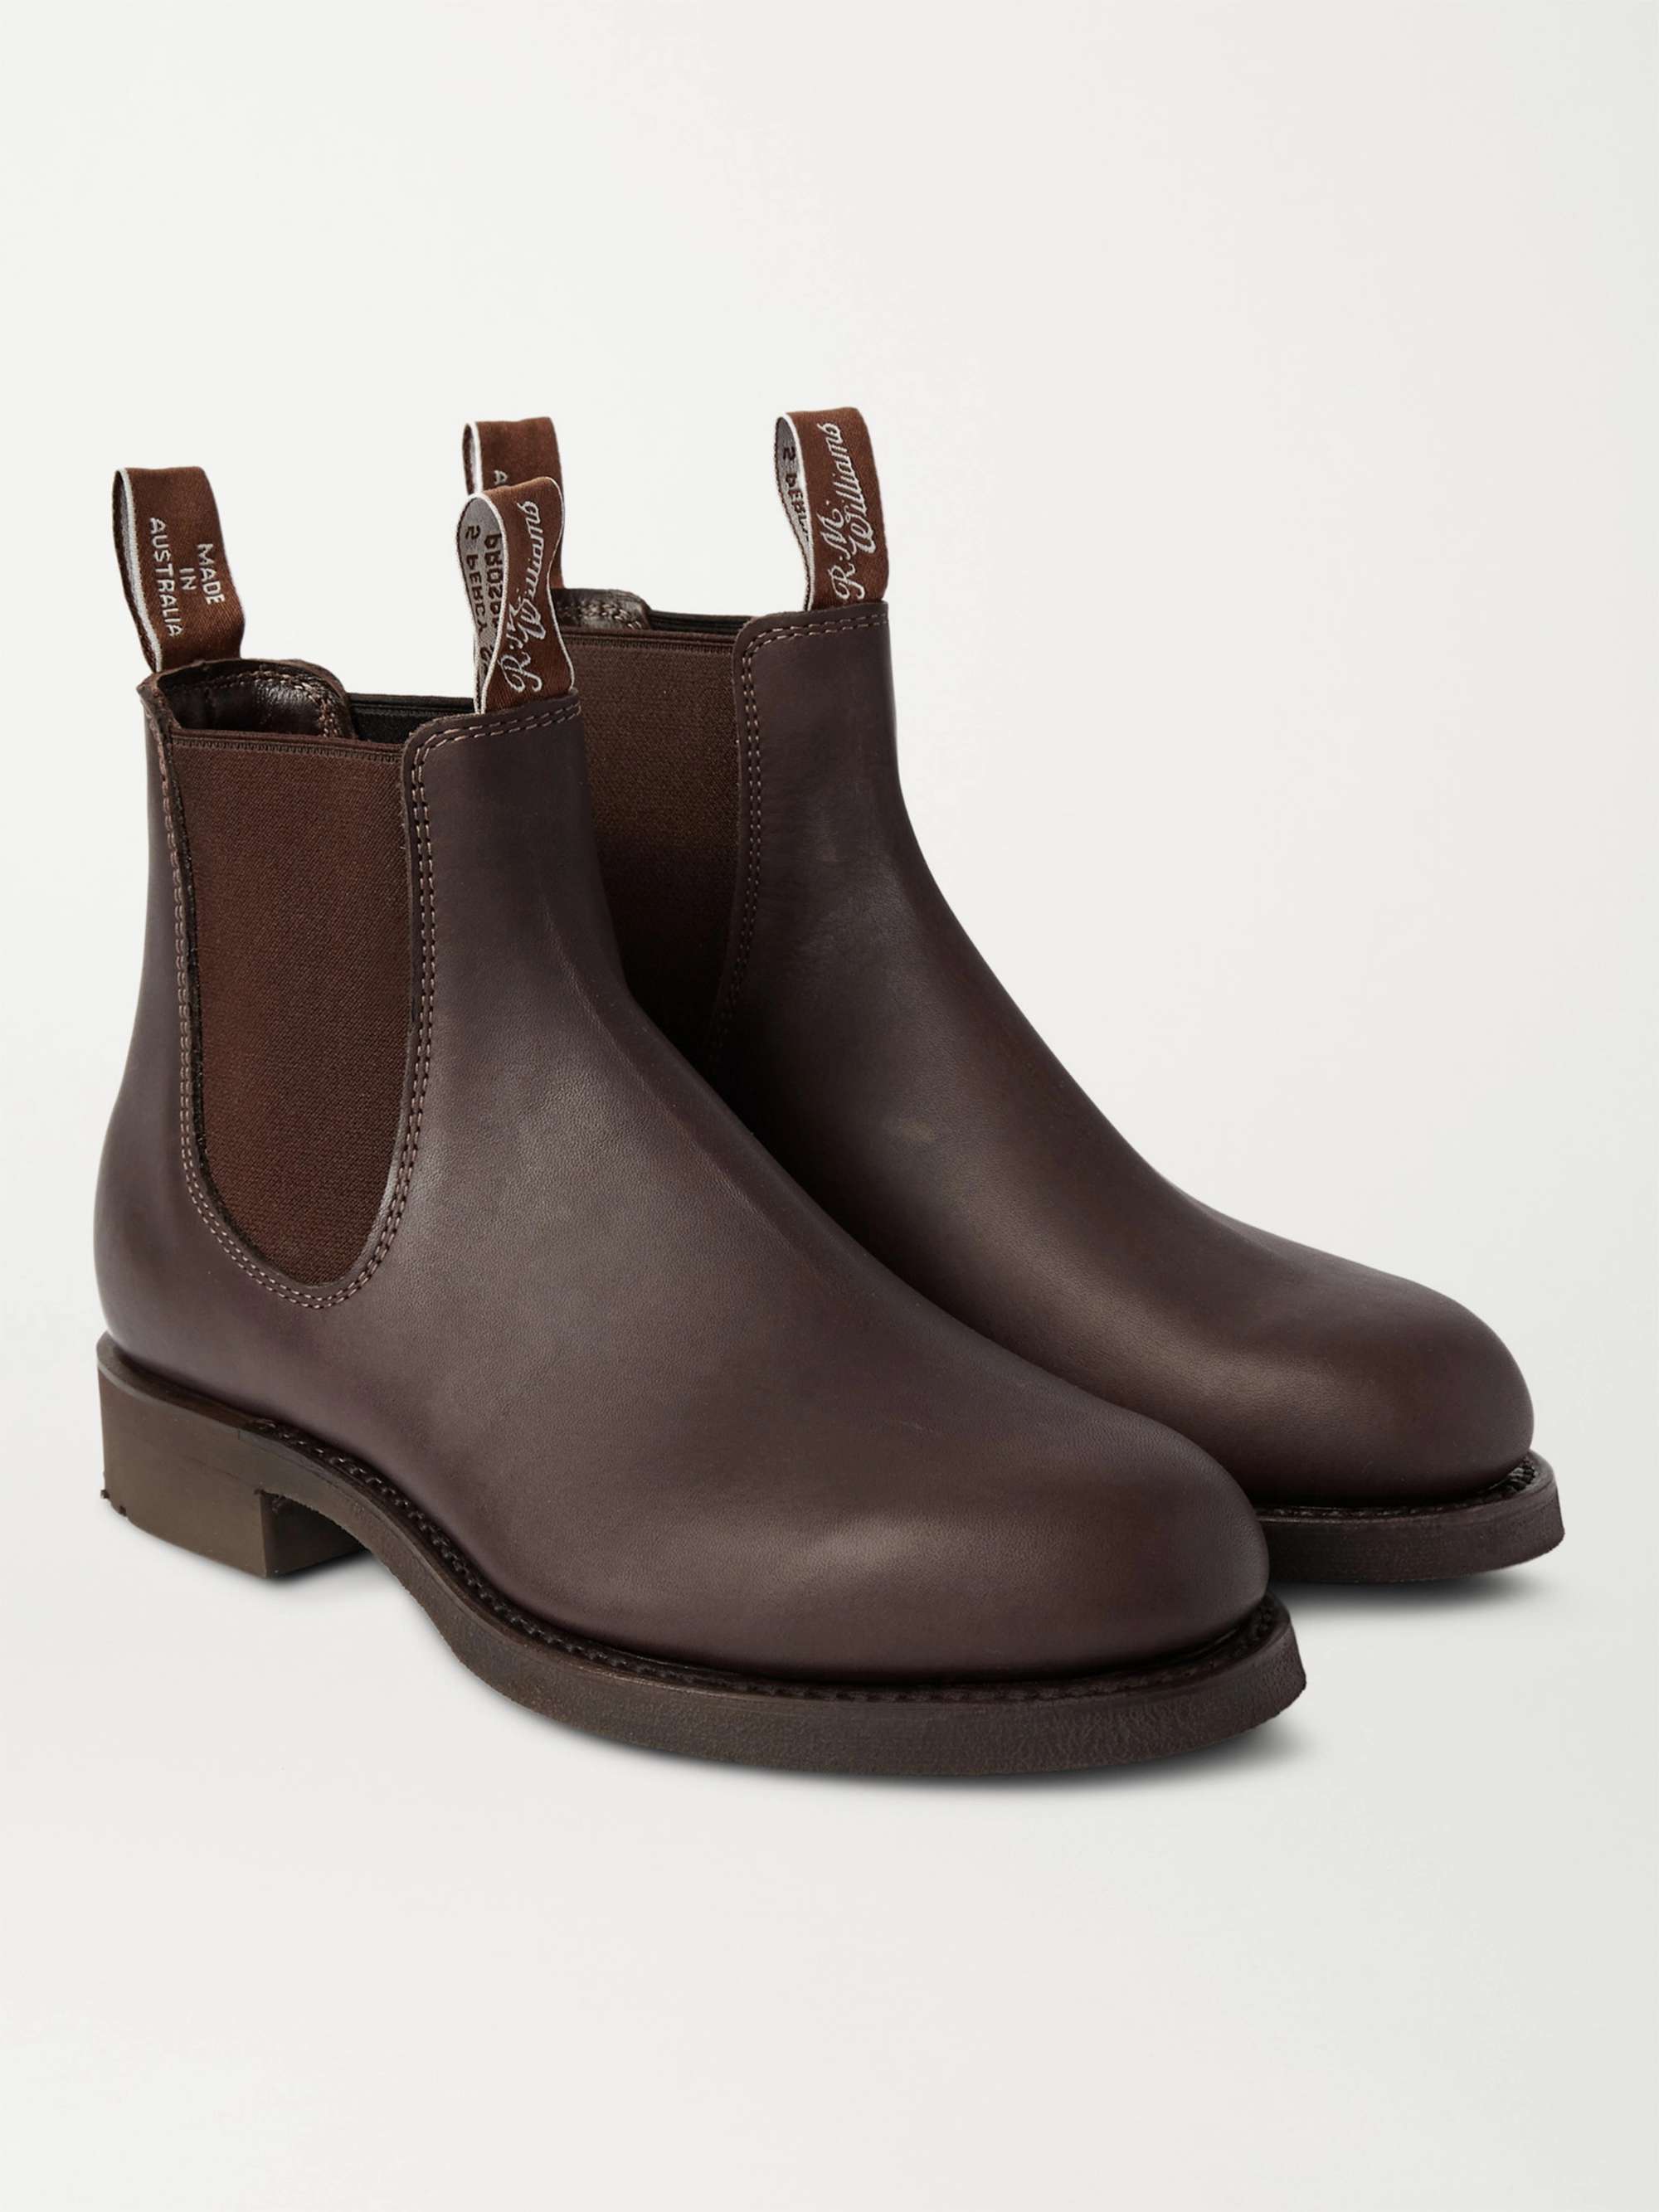 R.M.WILLIAMS Gardener Whole-Cut Leather Chelsea Boots